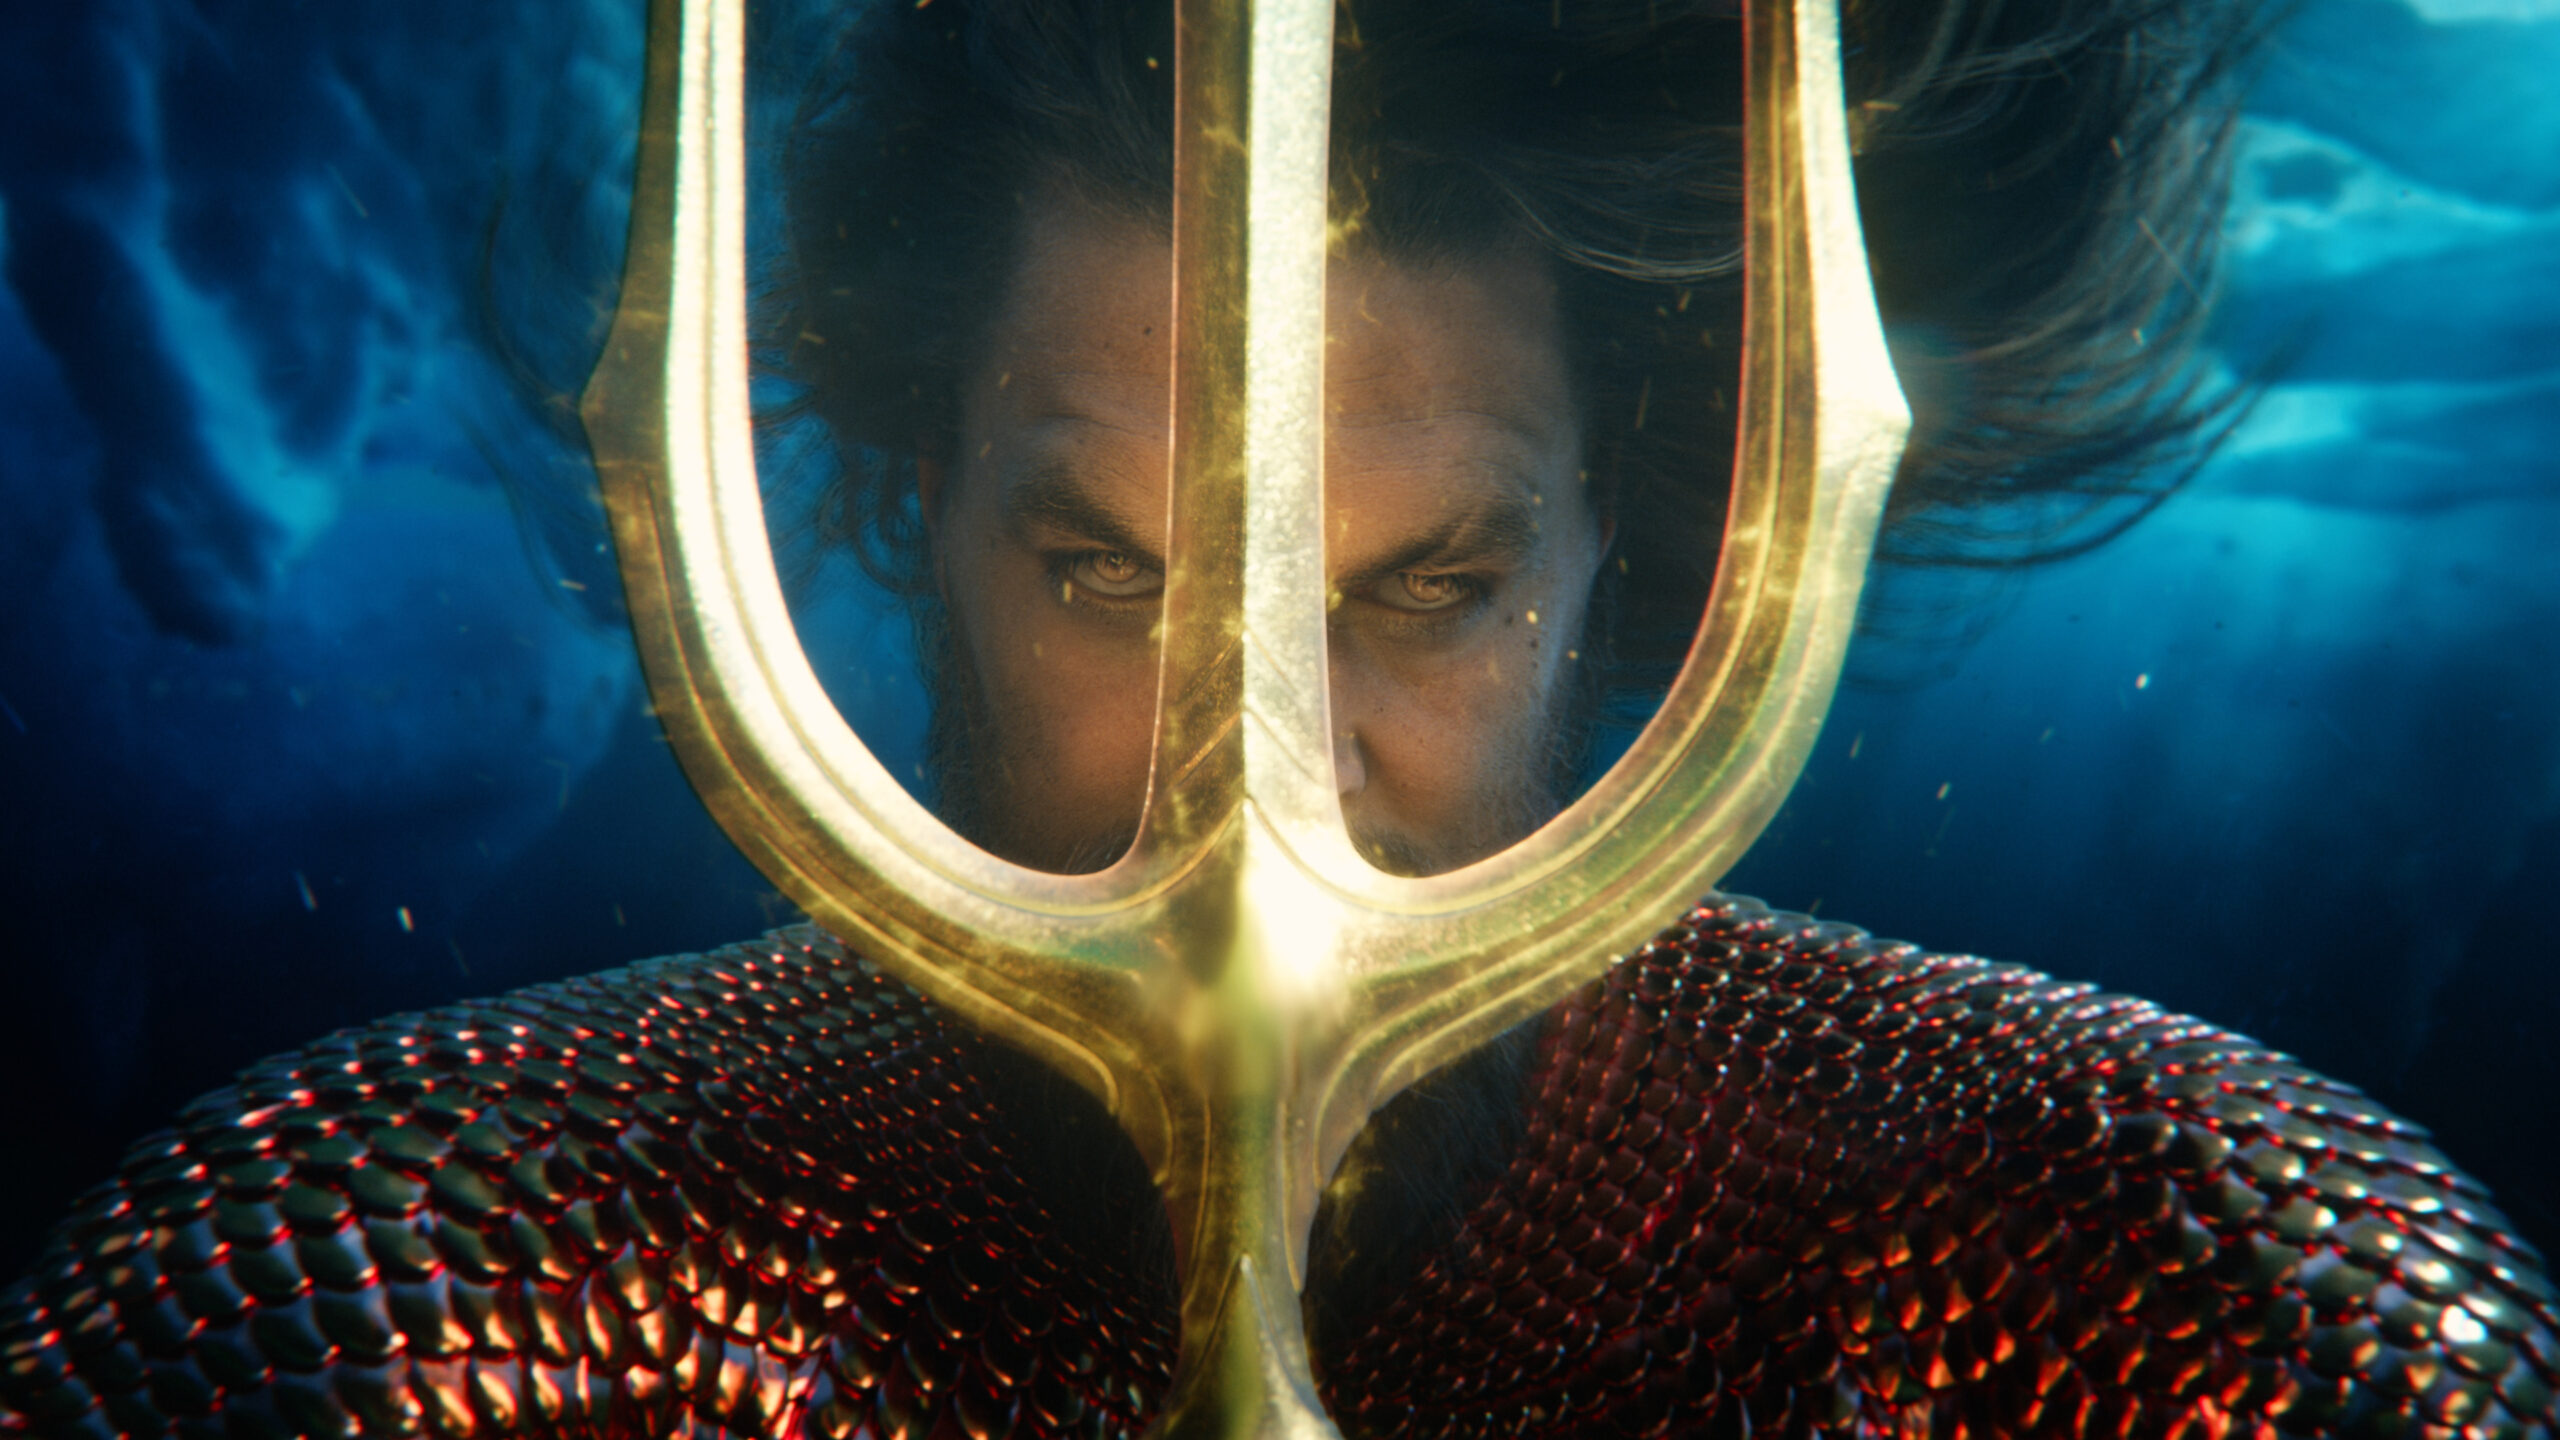 Aquaman And The Lost Kingdom Trailer Sets The Stage For An Epic Battle